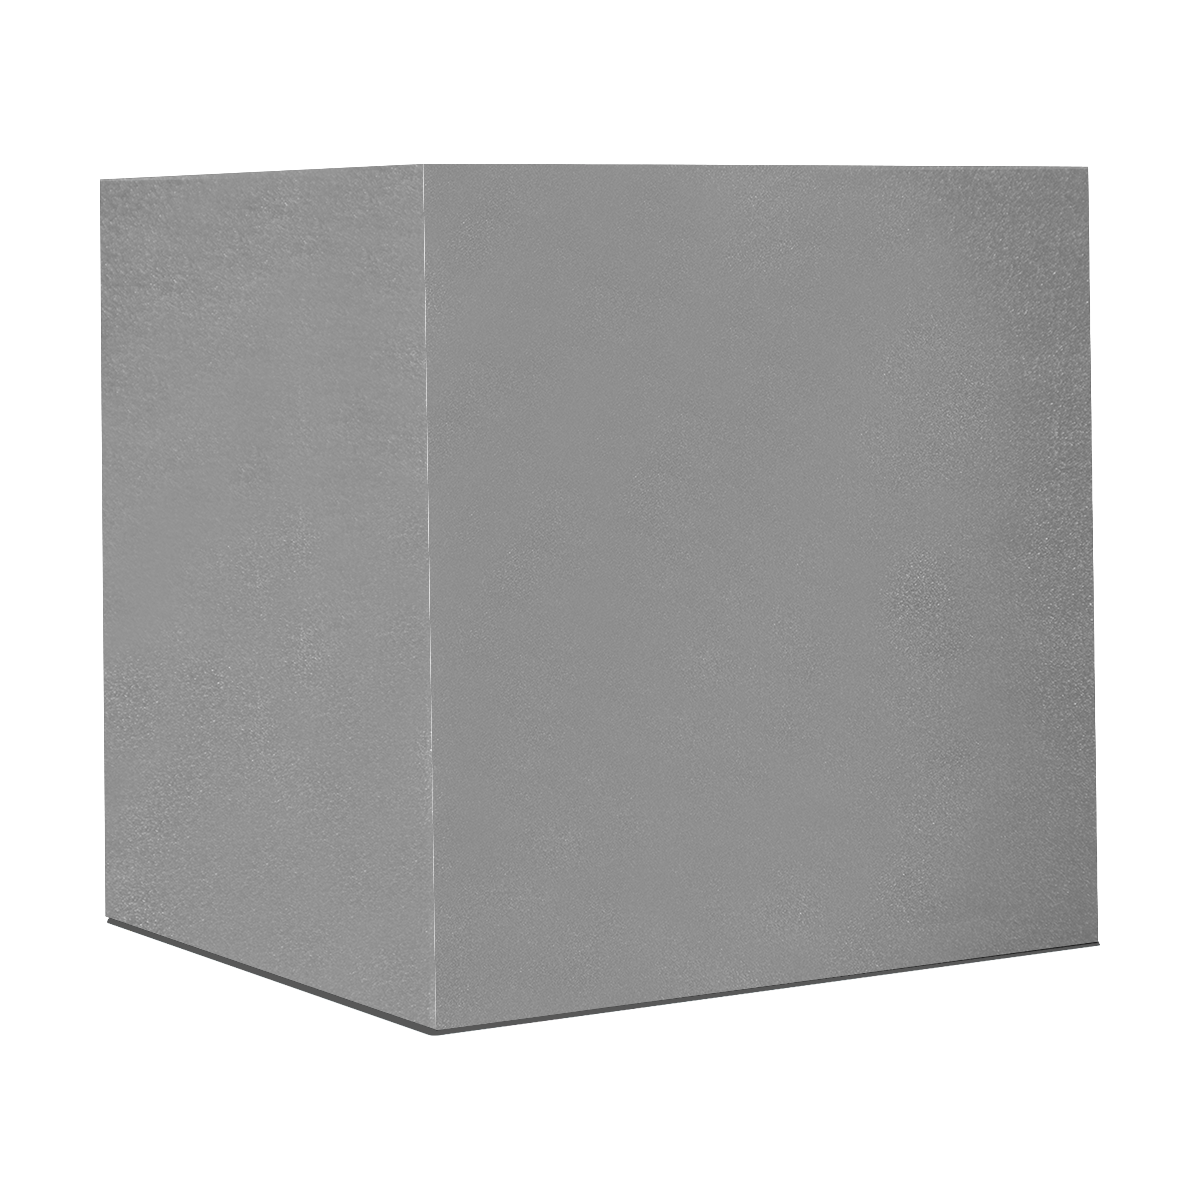 color grey Gift Wrapping Paper 58"x 23" (1 Roll)